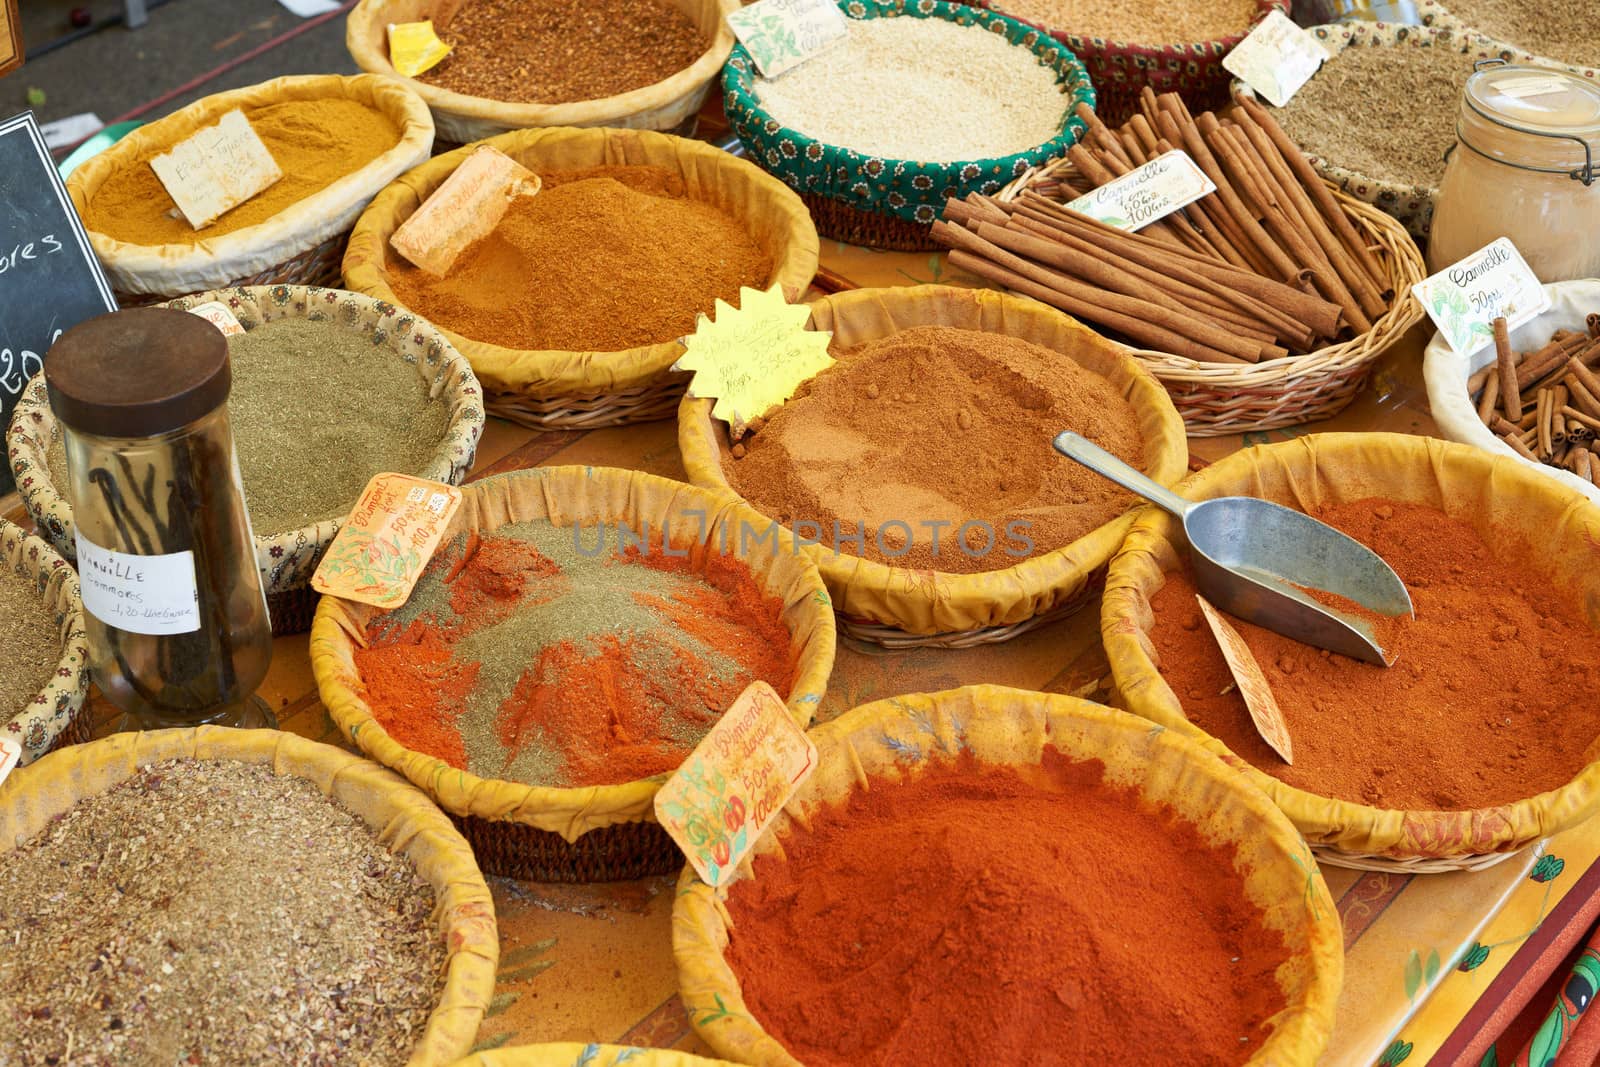 Random aromatic spices including paprica, curcuma and other for sale on Aix en Provence market, South France